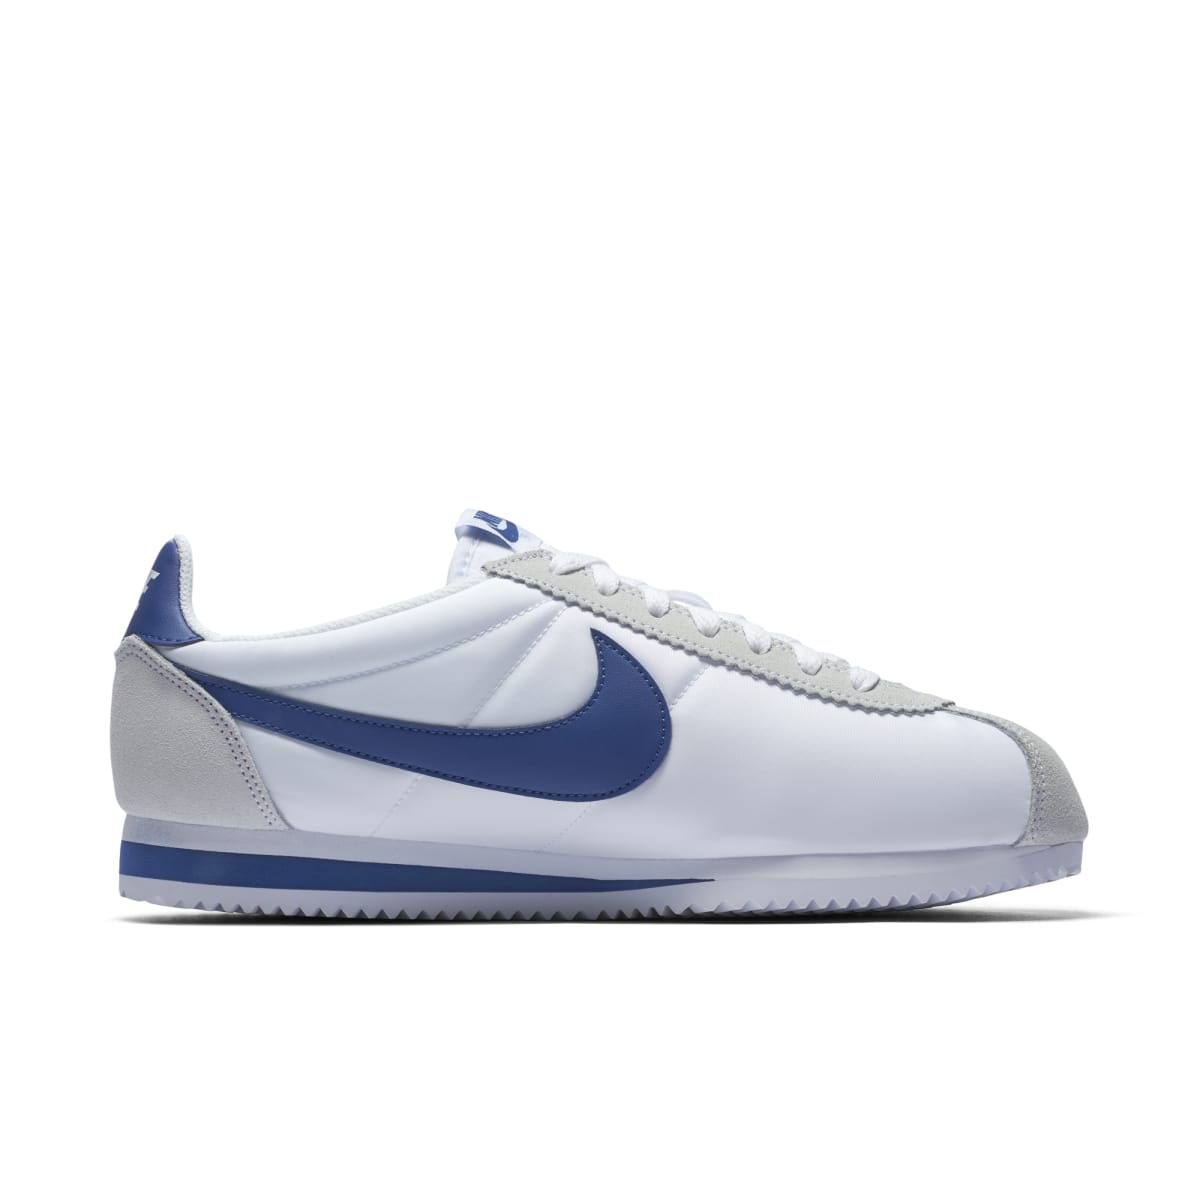 nike cortez mens blue and white